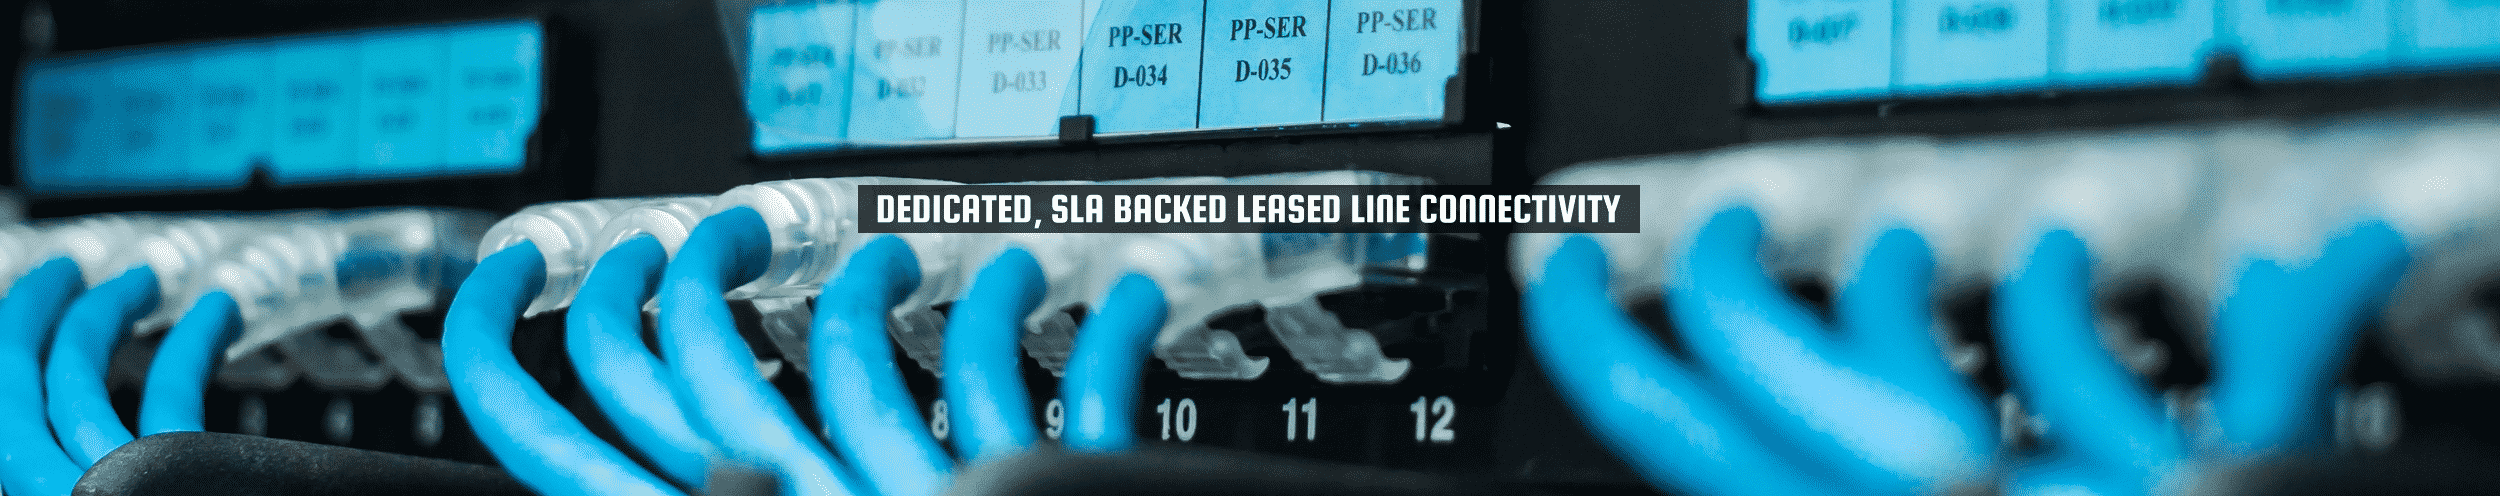 52Degrees Leased Lines - feature image | "dedicated, SLA backed leased line connectivity" | blue wires are plugged into a server | Telecoms Solutions, Norwich